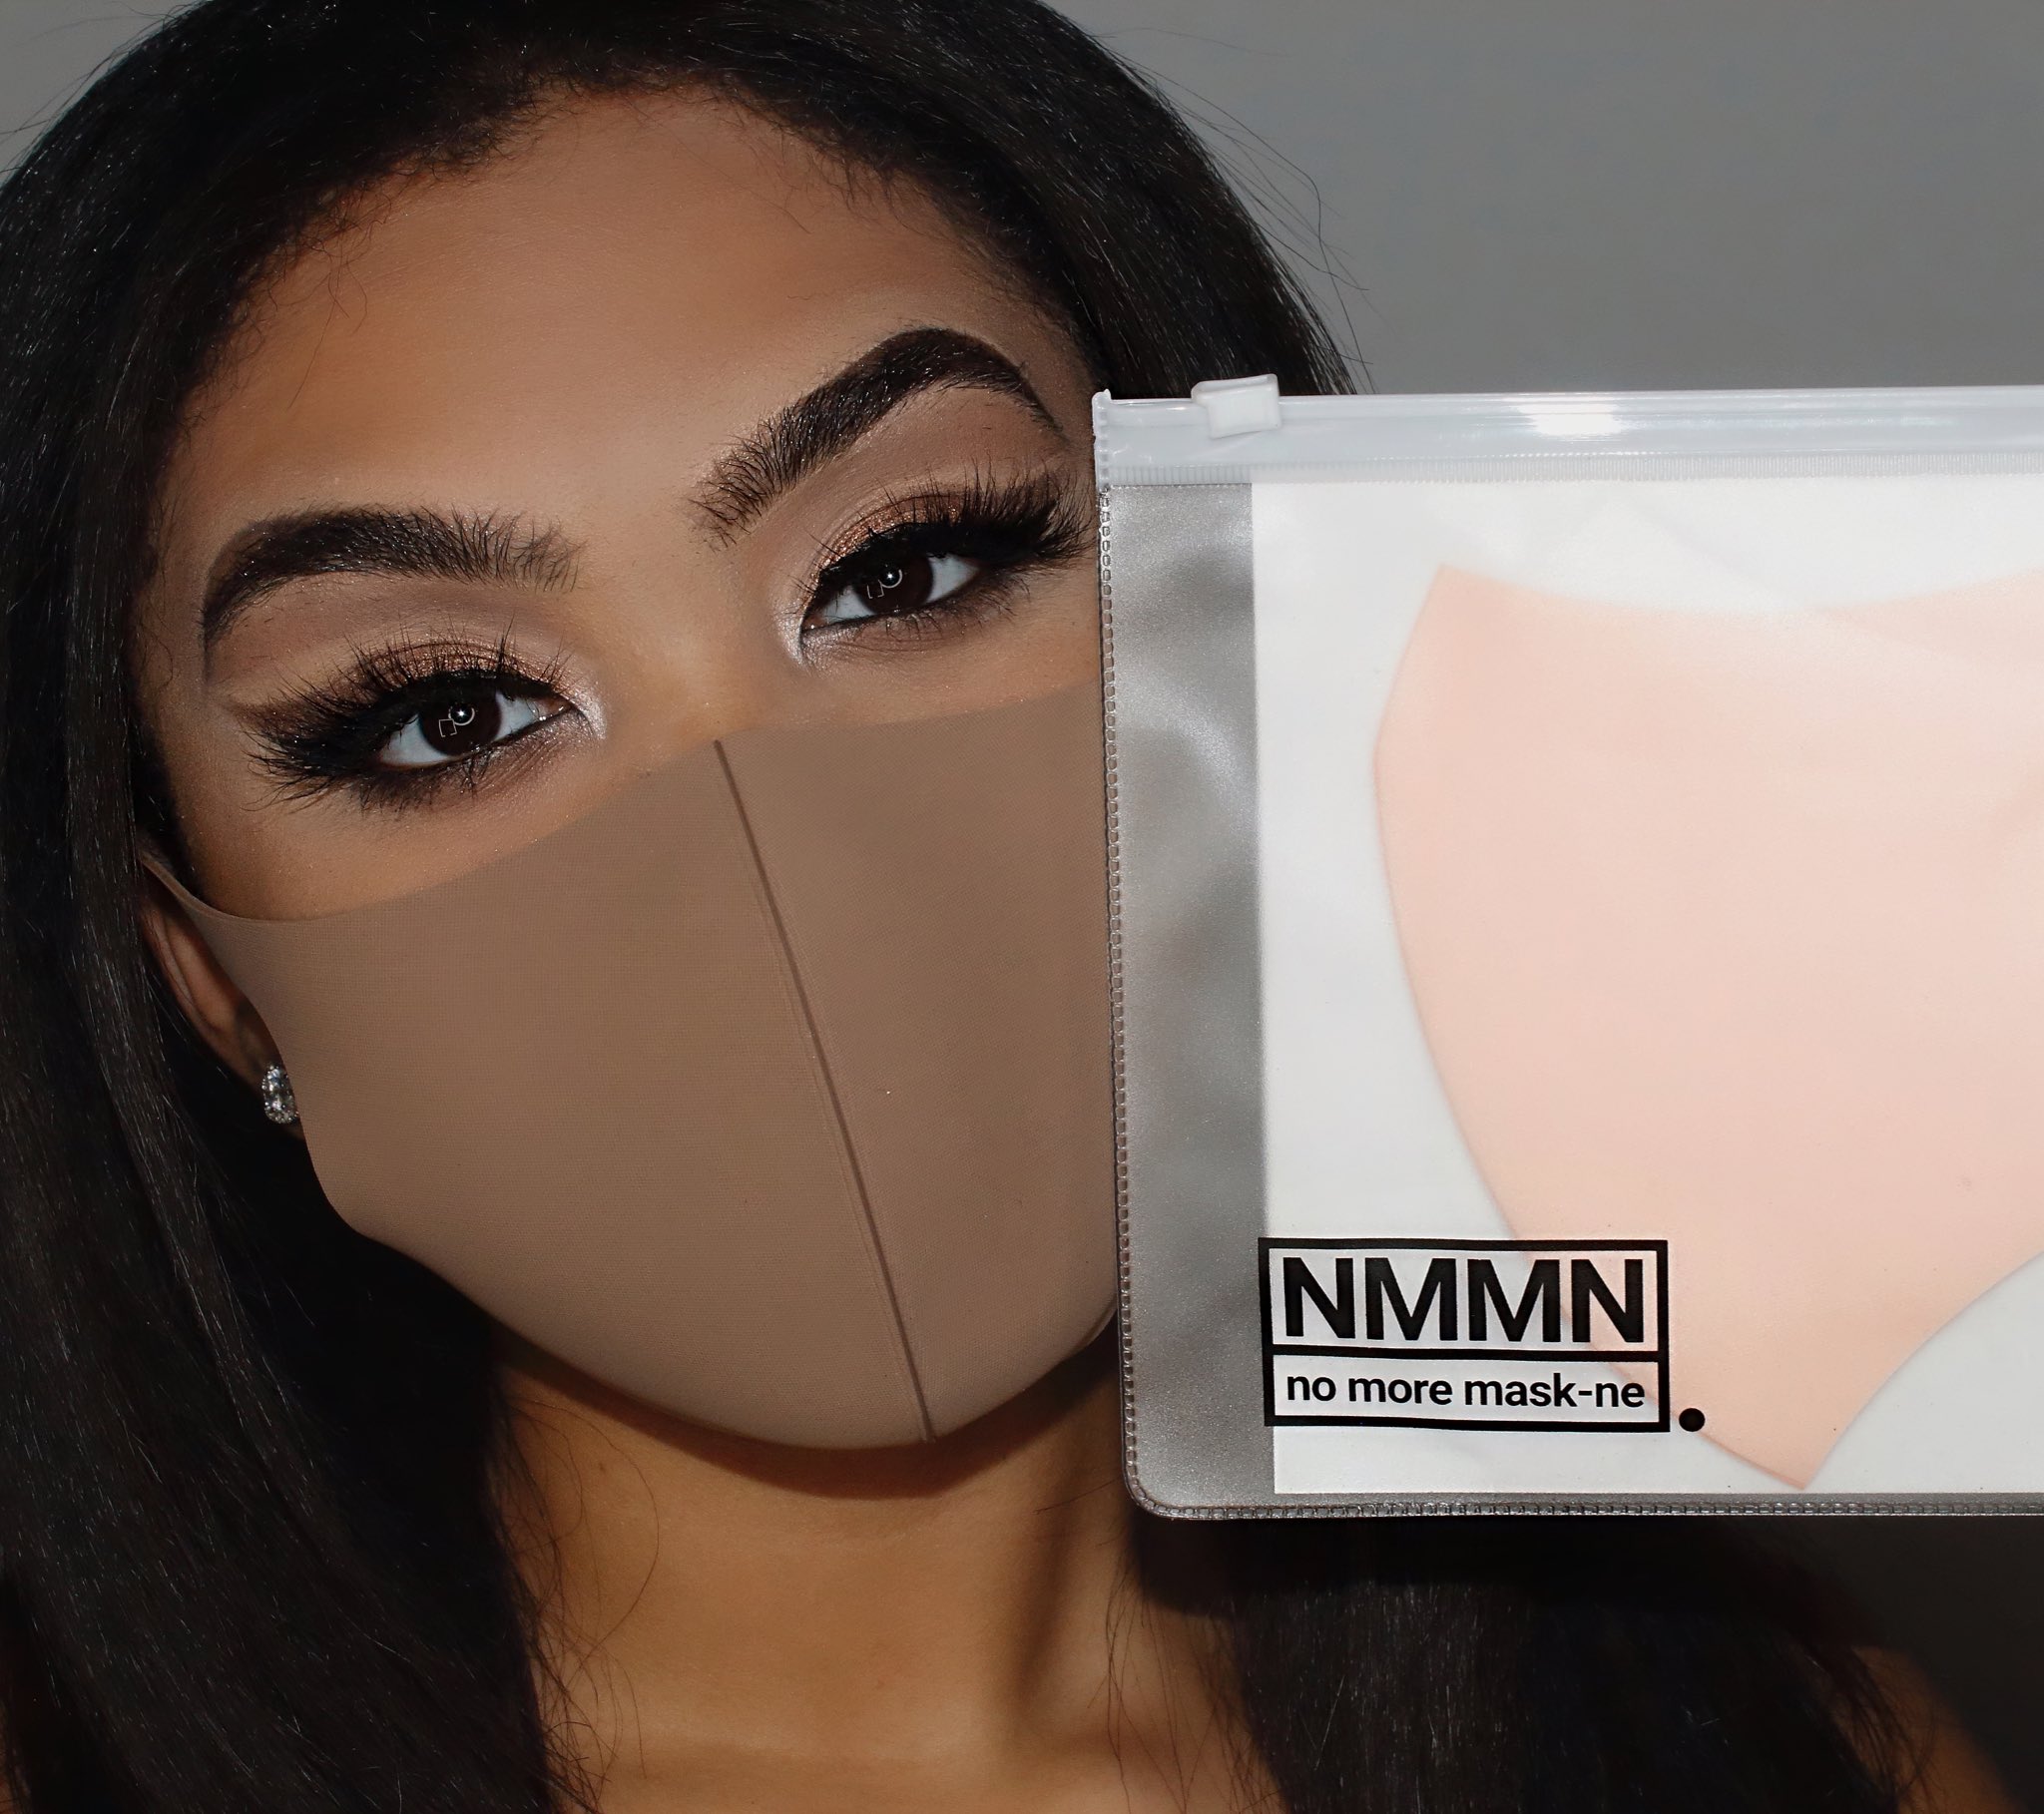 Lily Hope🤍 Content Creator on X: NMMN🤎 Thank you @beaubble for sending  these over 🥰 @beaubble created a minimalistic, sleek, irritant limiting  mask! It is UV protected, antibacterial, flexible, and helps prevent